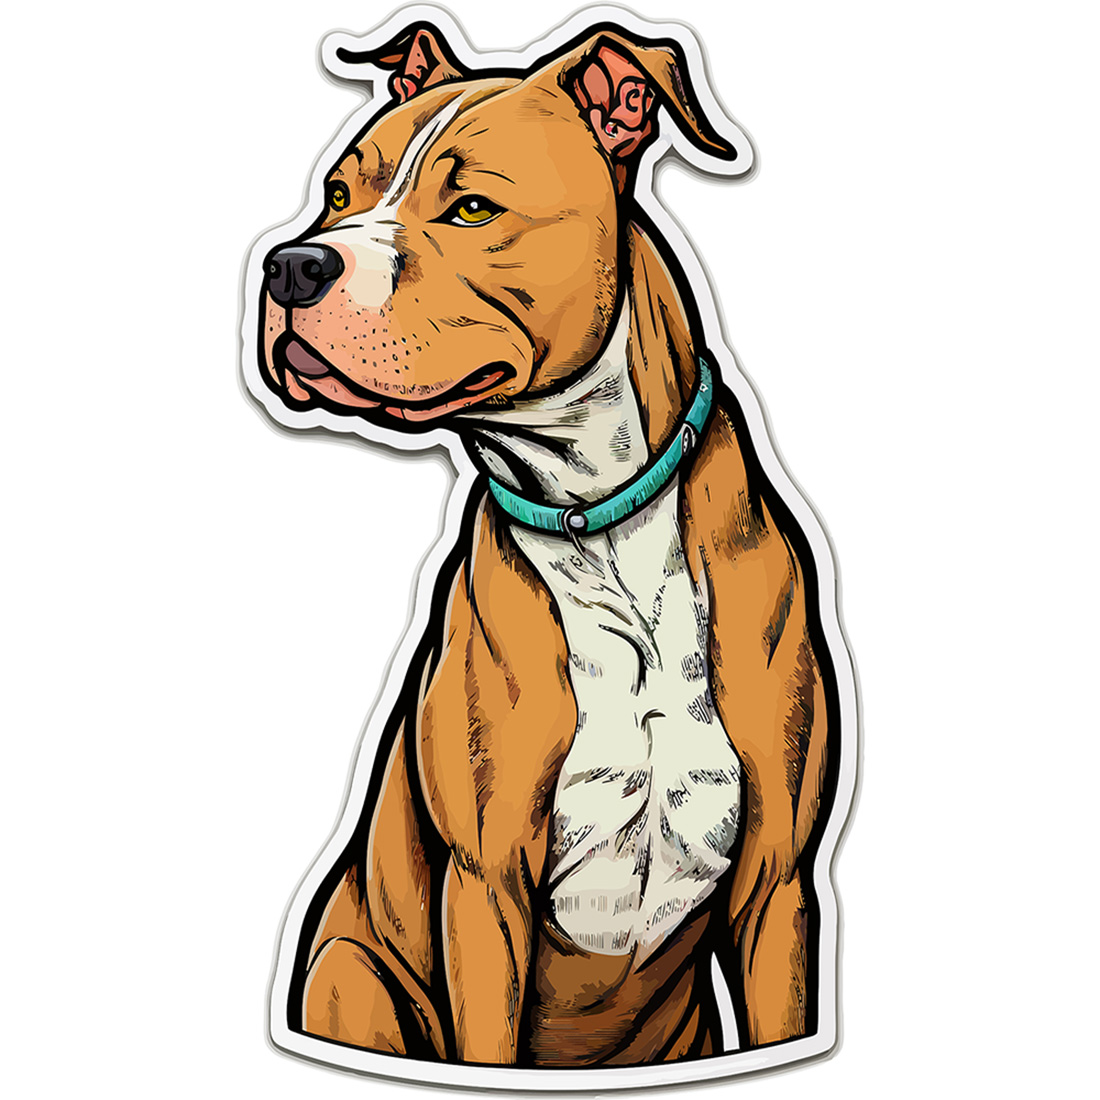 2 vectors of Sketch dog American Staffordshire terrier breed cover image.